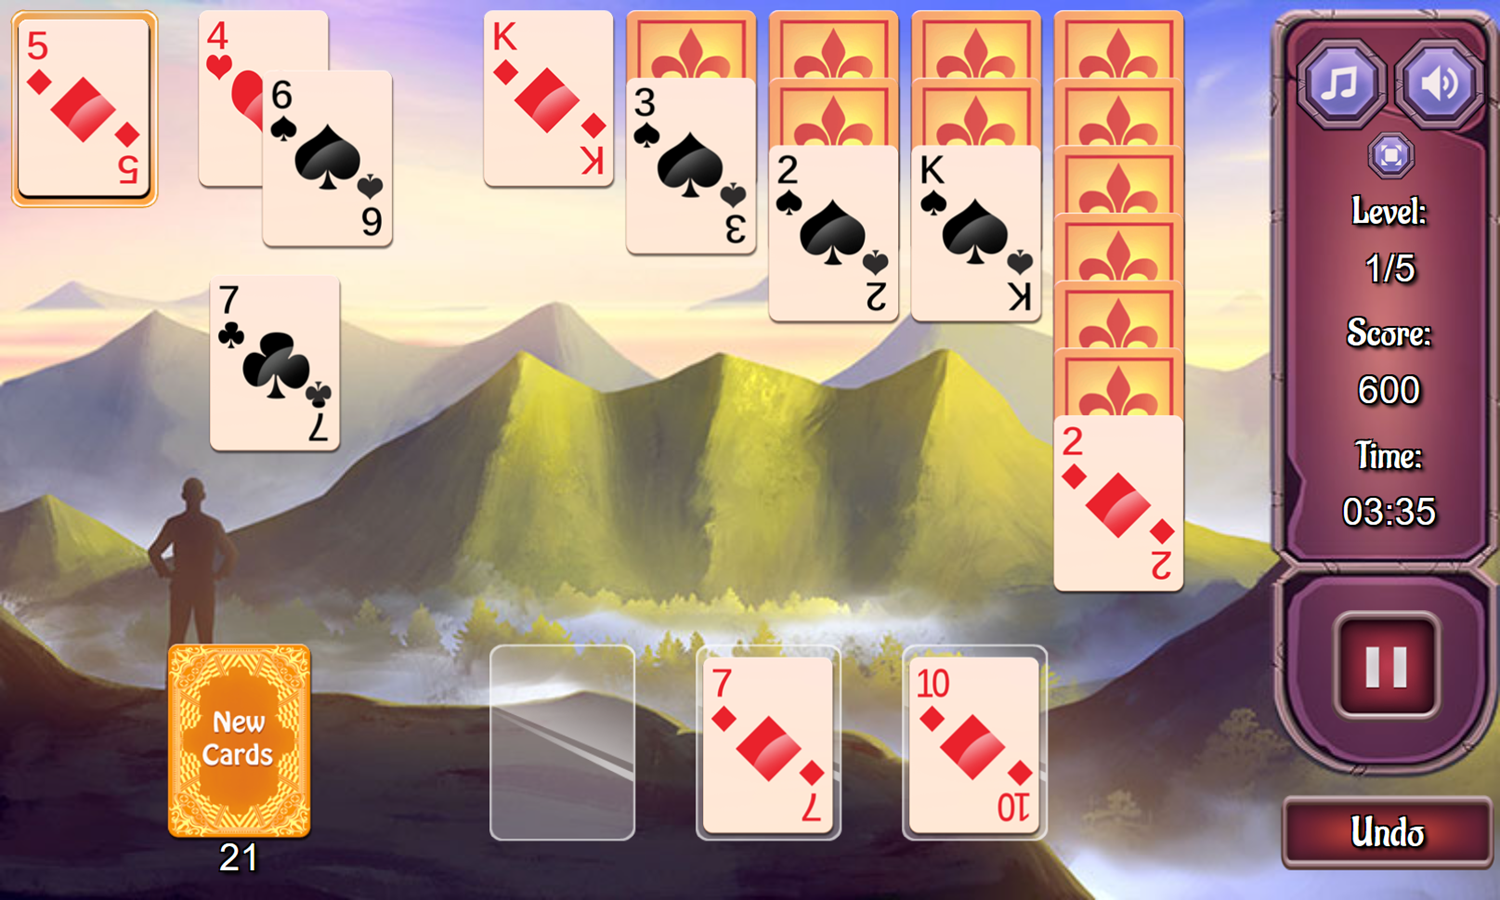 Pyramid Mountains Solitaire Game Play Screenshot.